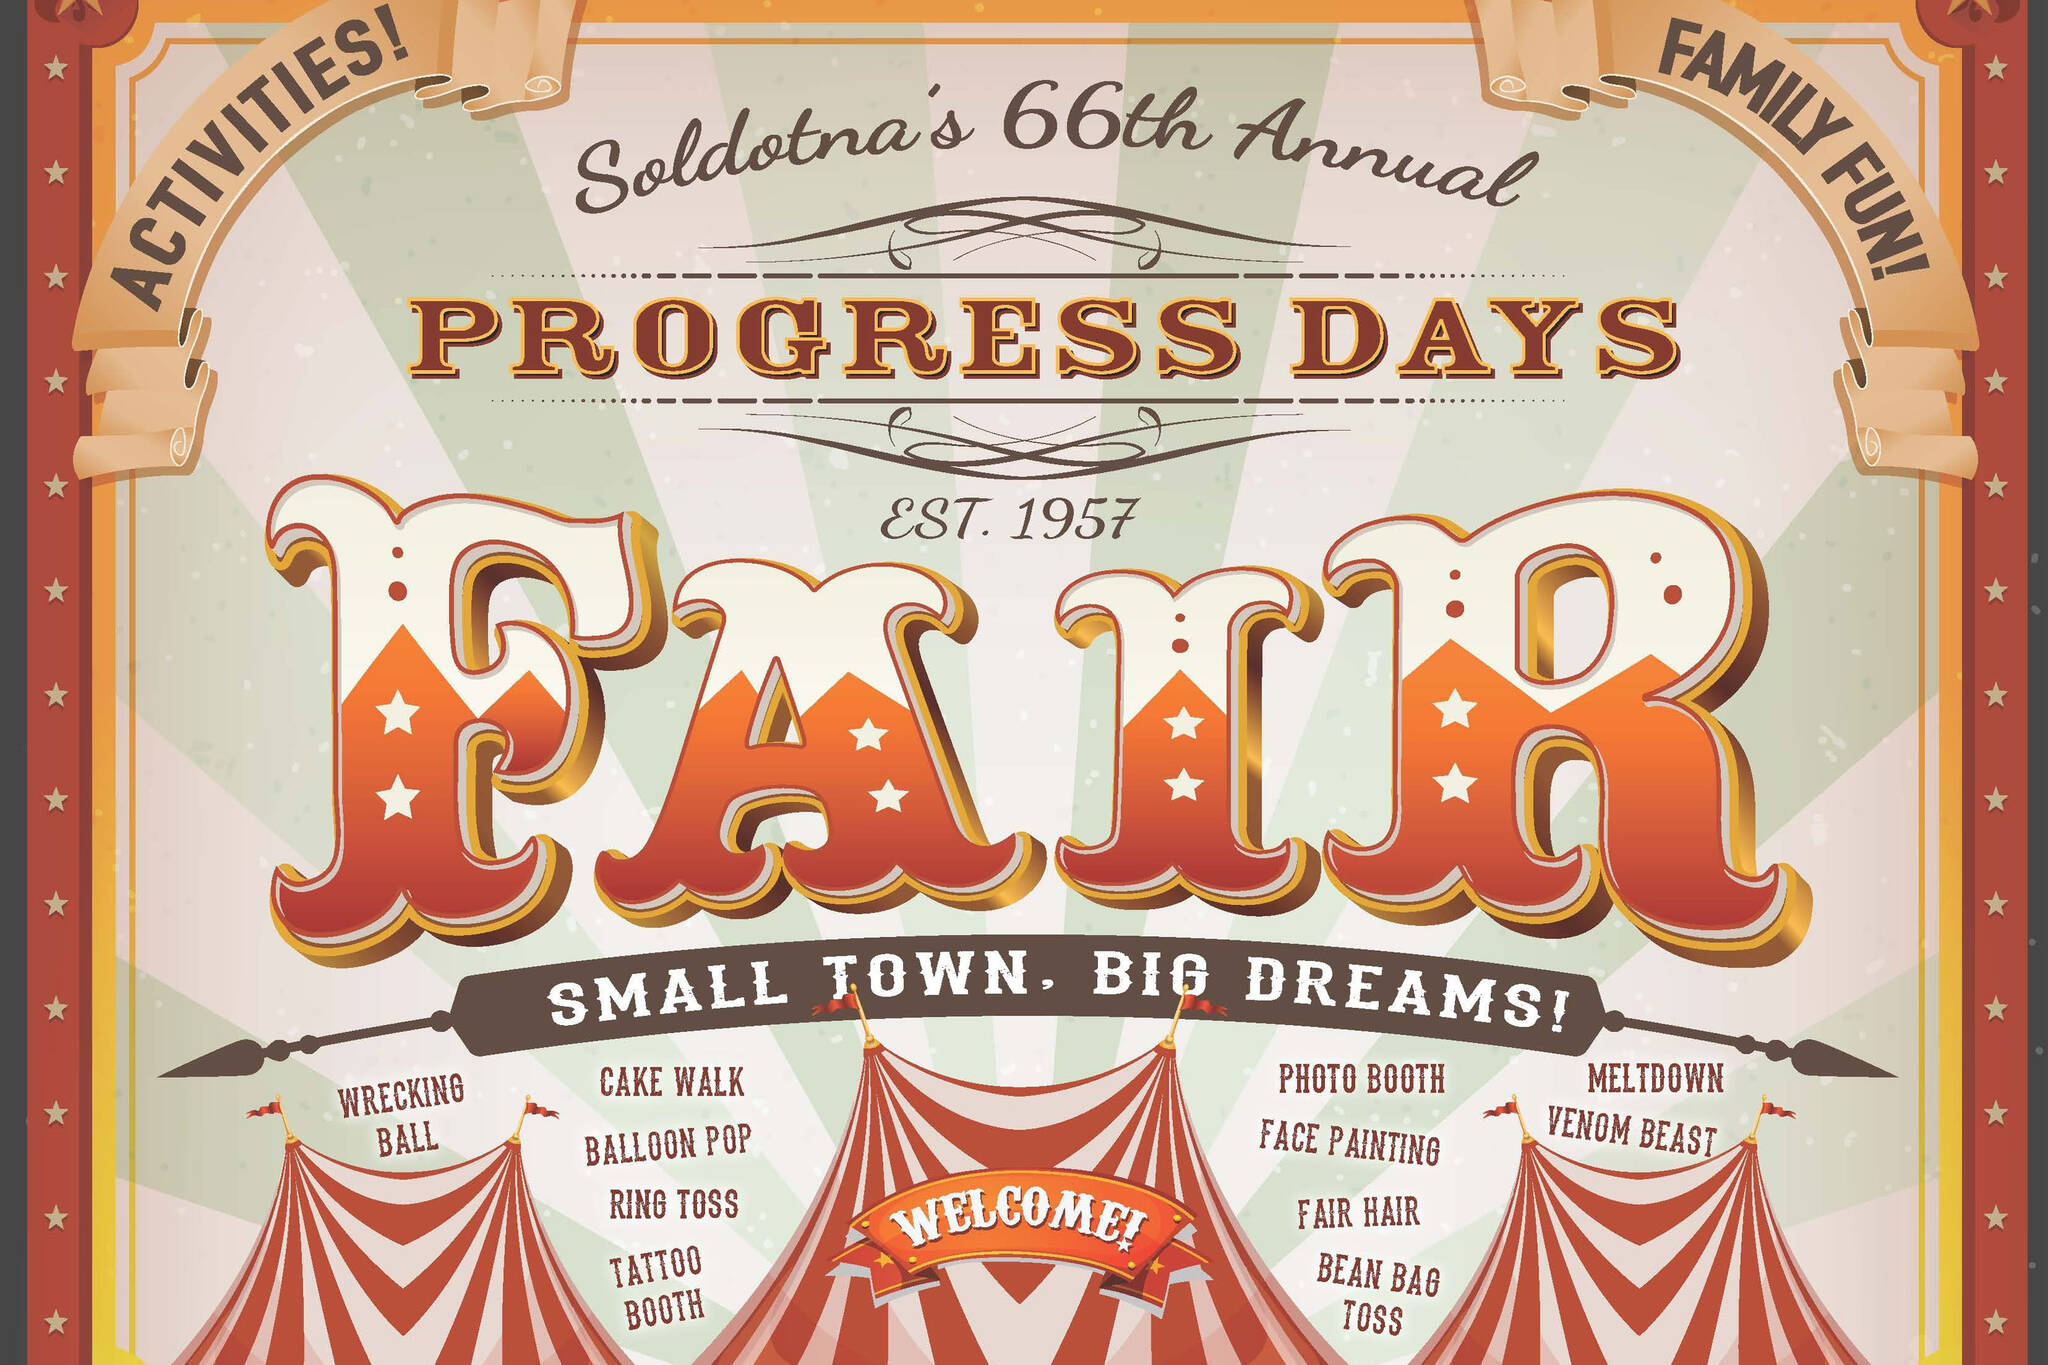 Promotional poster for 66th Annual Progress Days in Soldotna. (Photo courtesy Soldotna Chamber of Commerce)